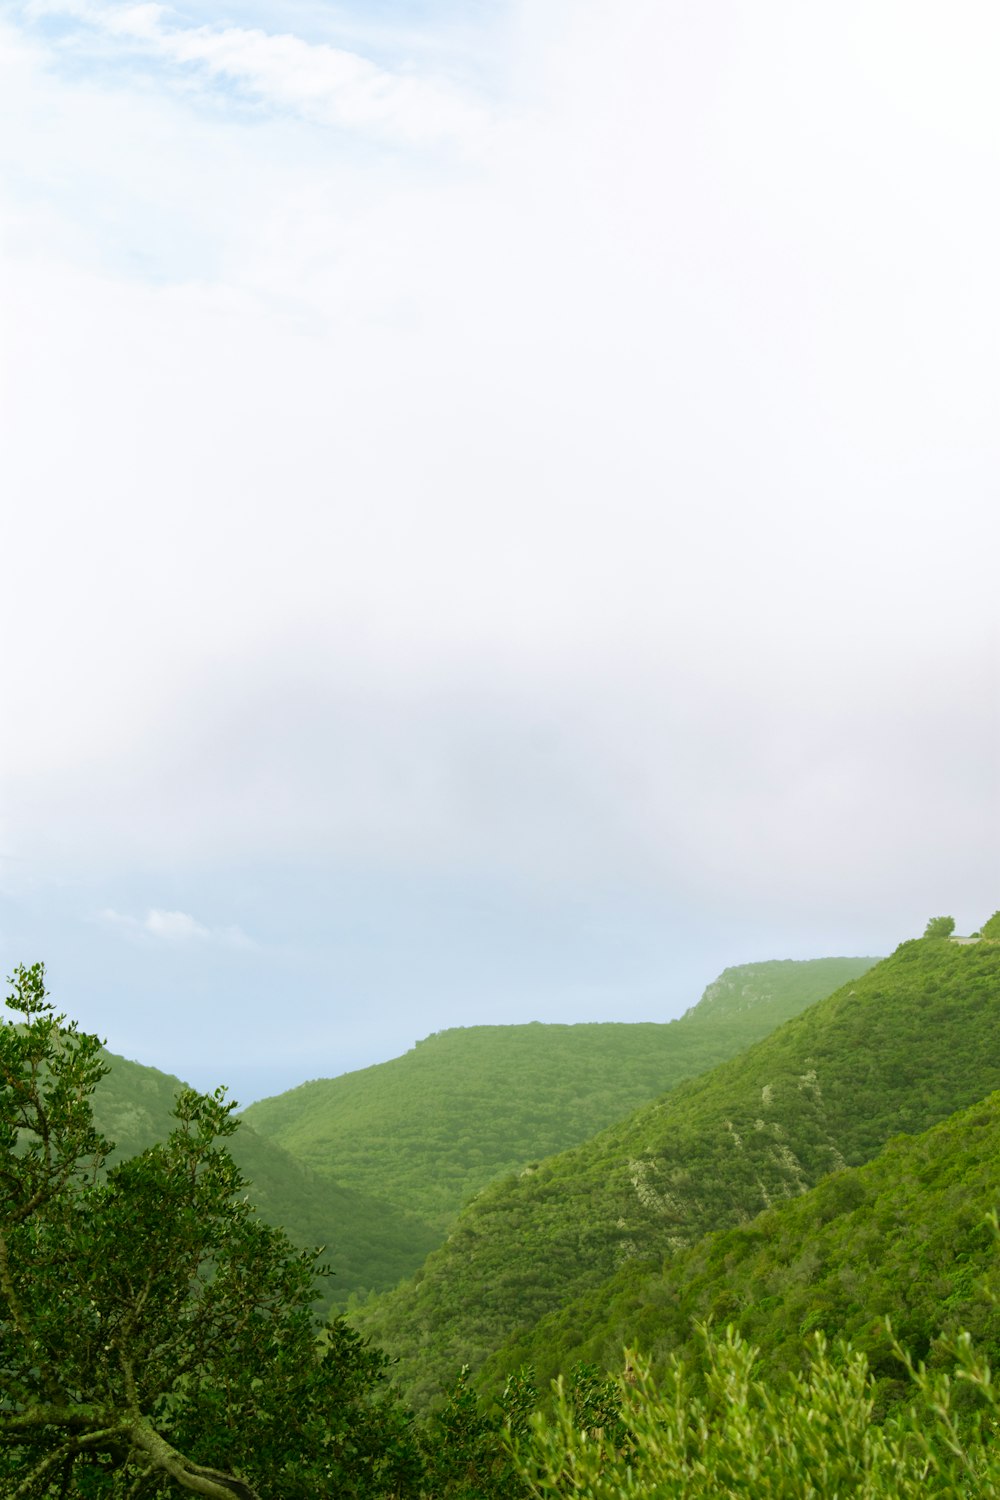 a view of a lush green hillside with mountains in the background